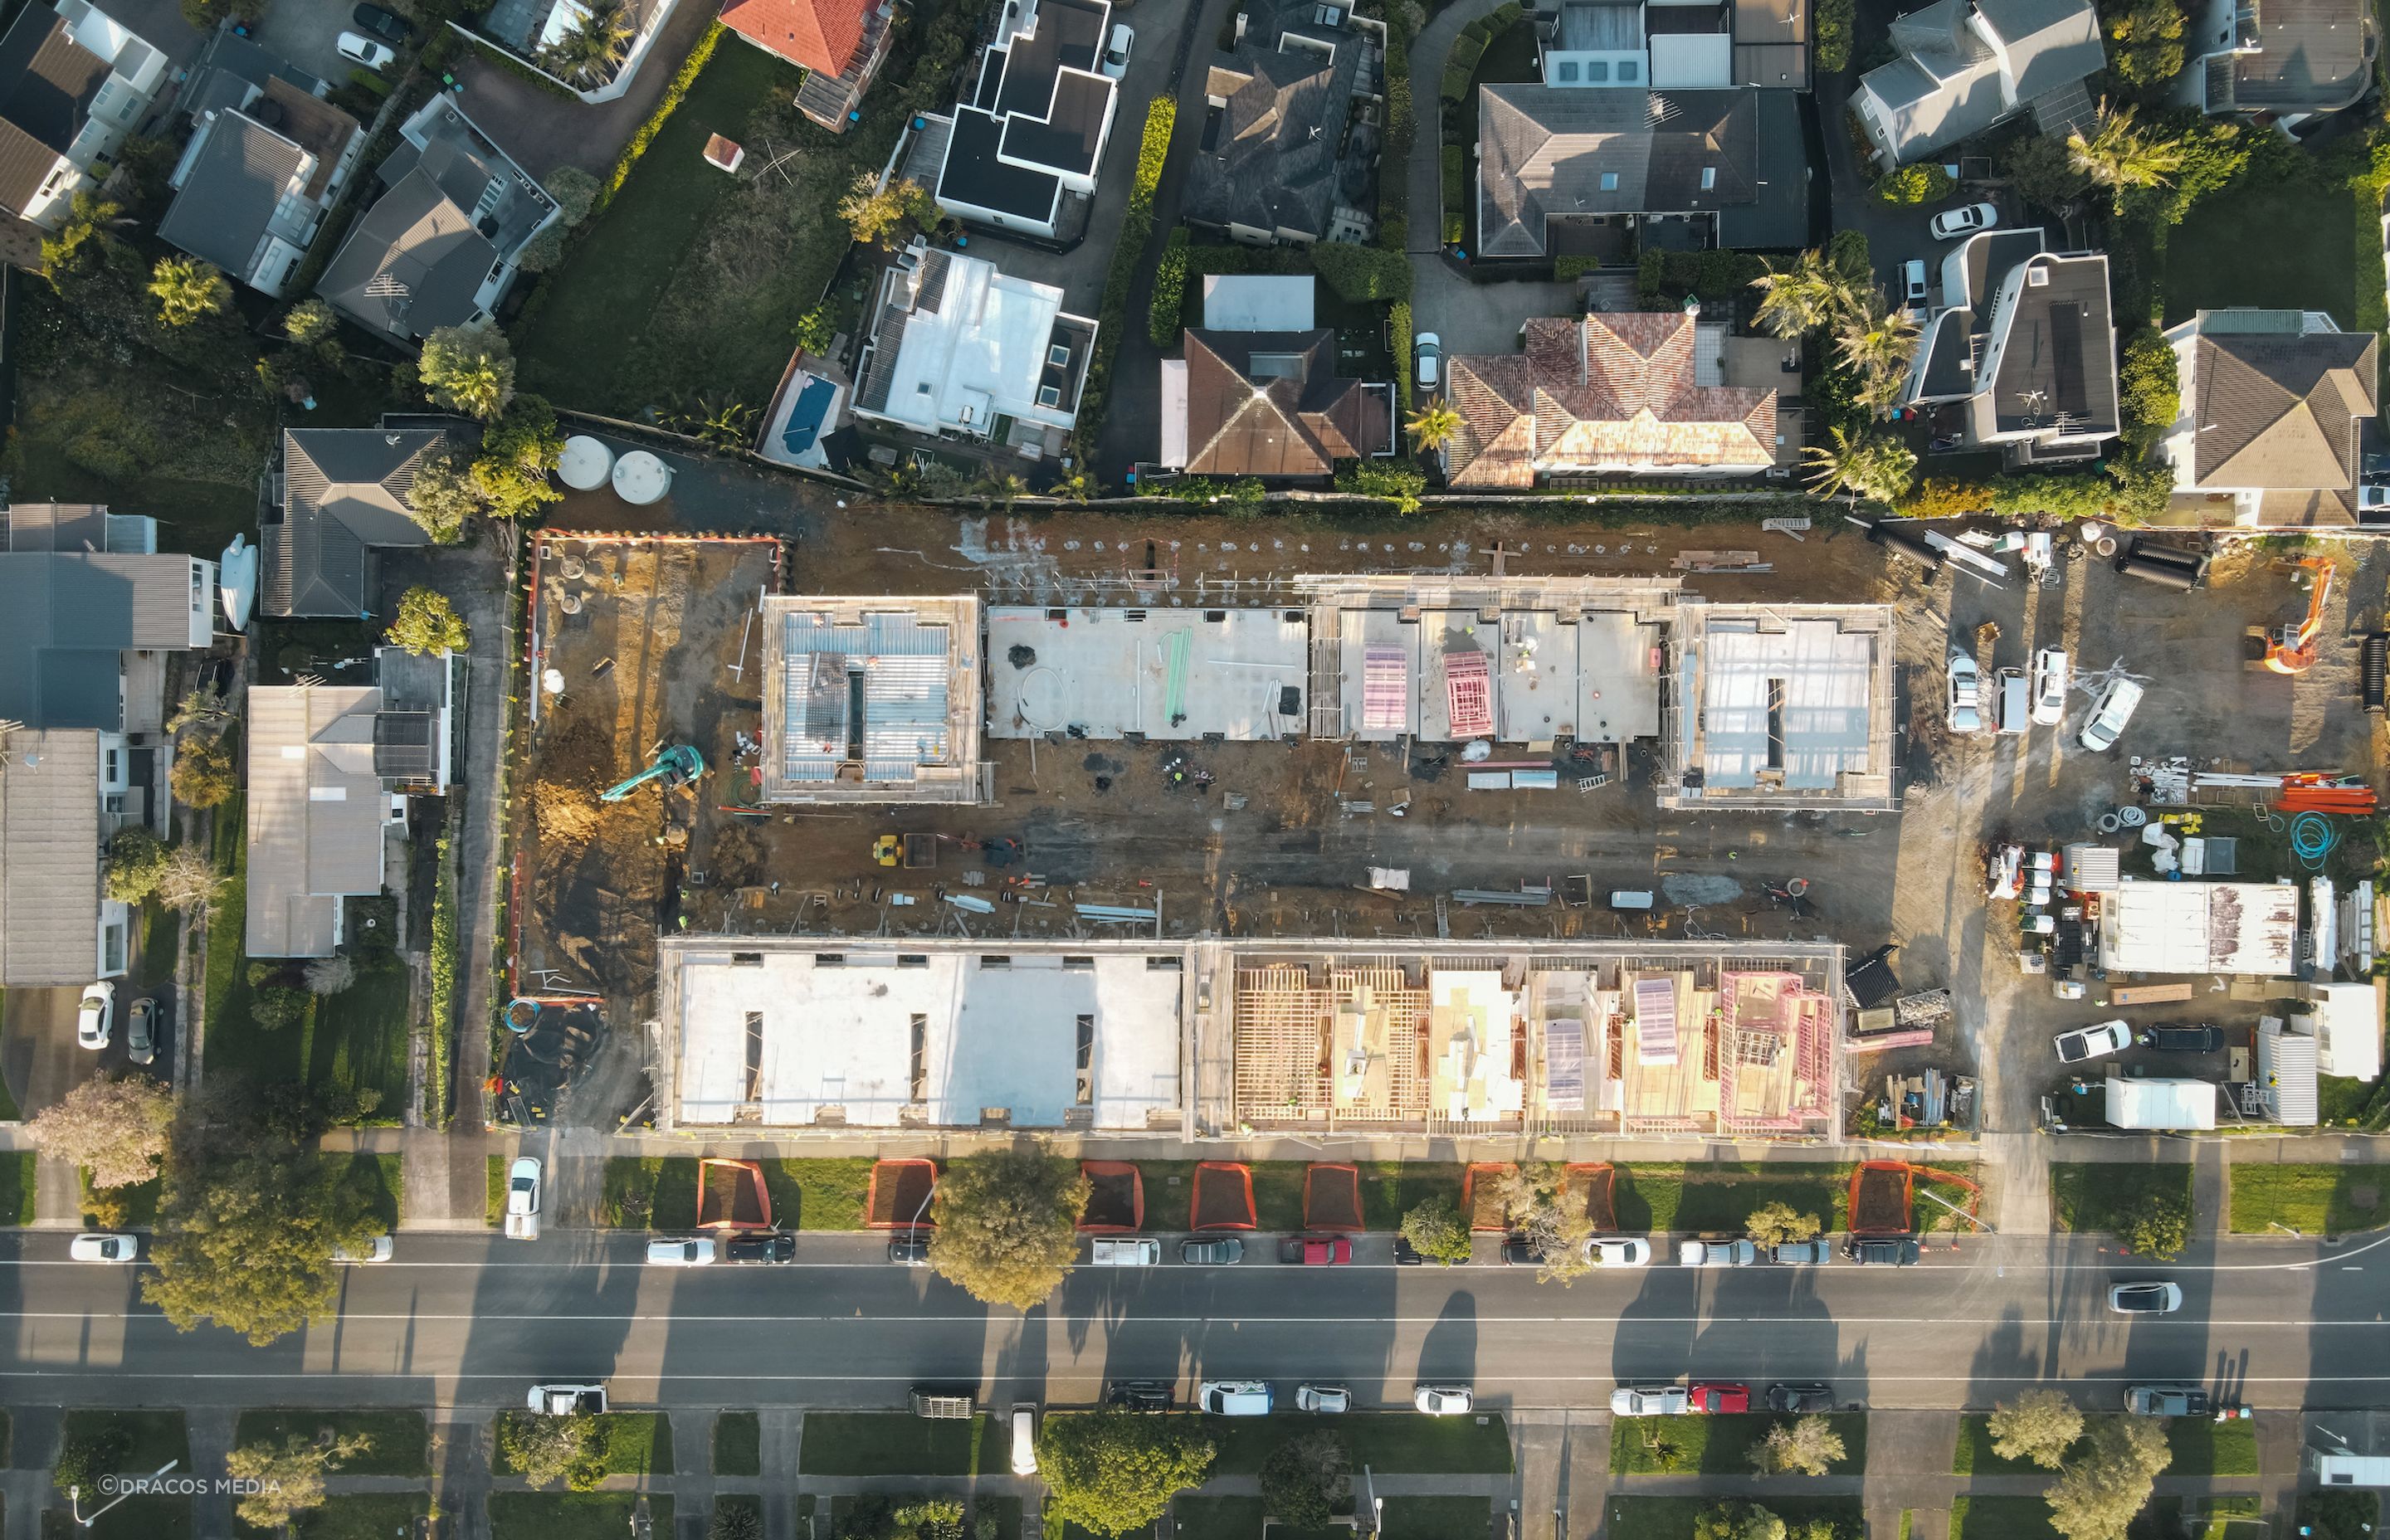 The project on Hawaiki Street consists of 24 one, two and four-bedroom homes.